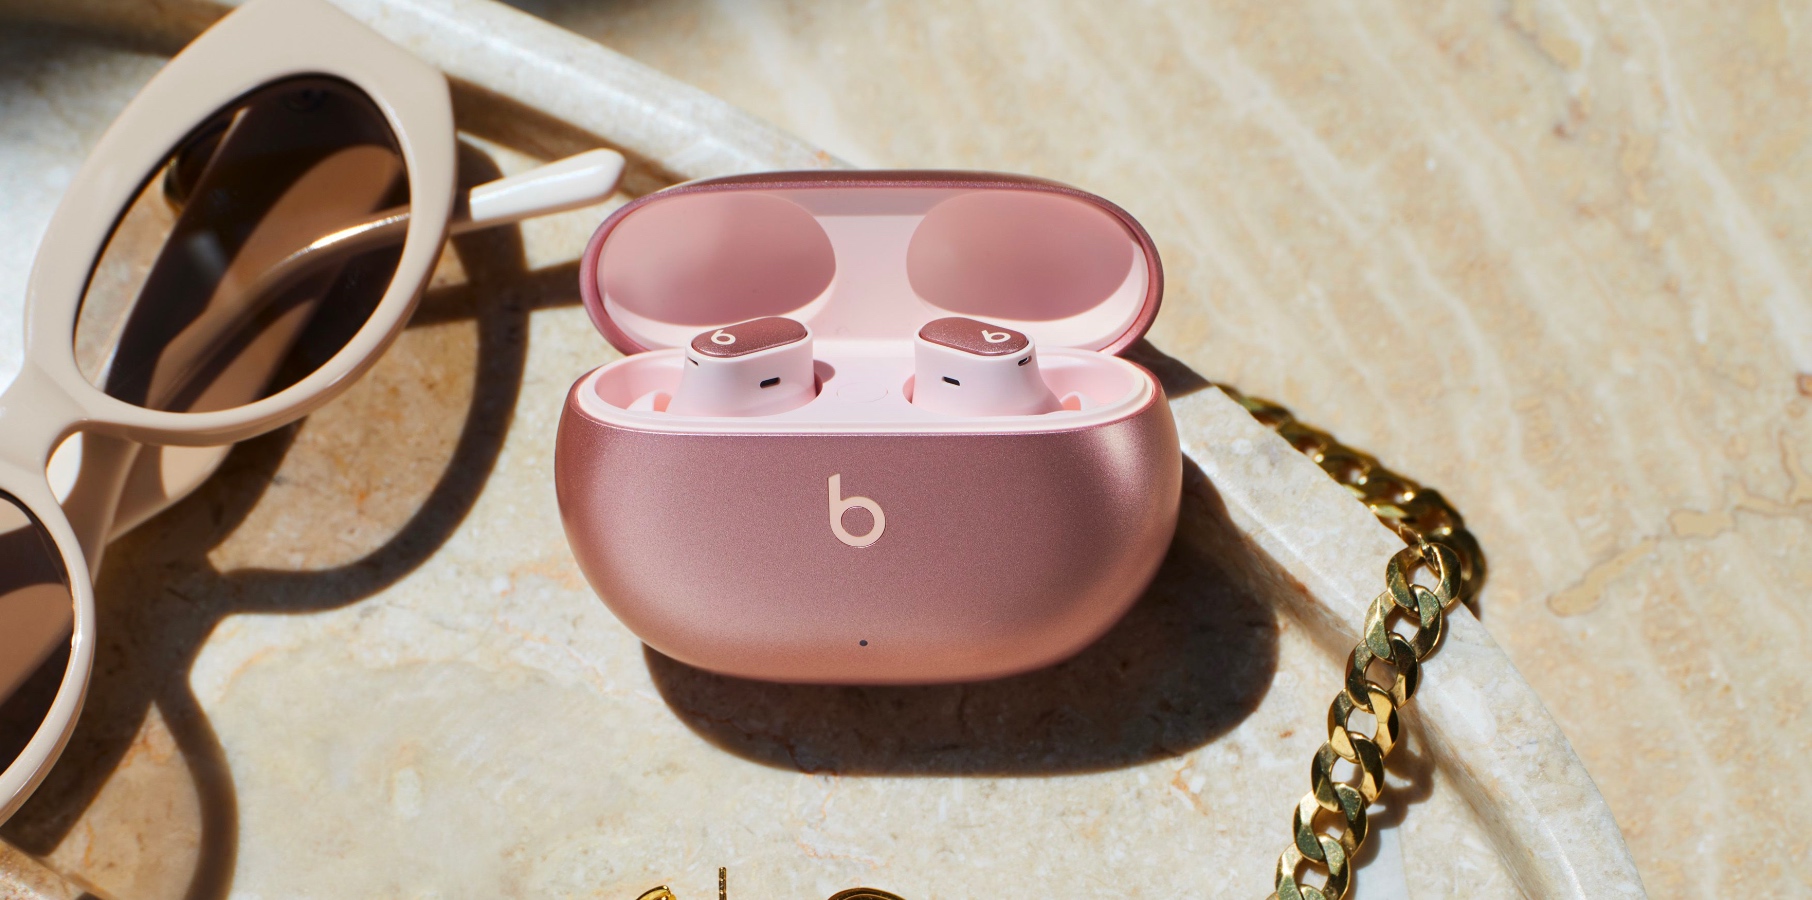 Beats Studio Buds+ new Cosmic Silver and Pink colors launch on